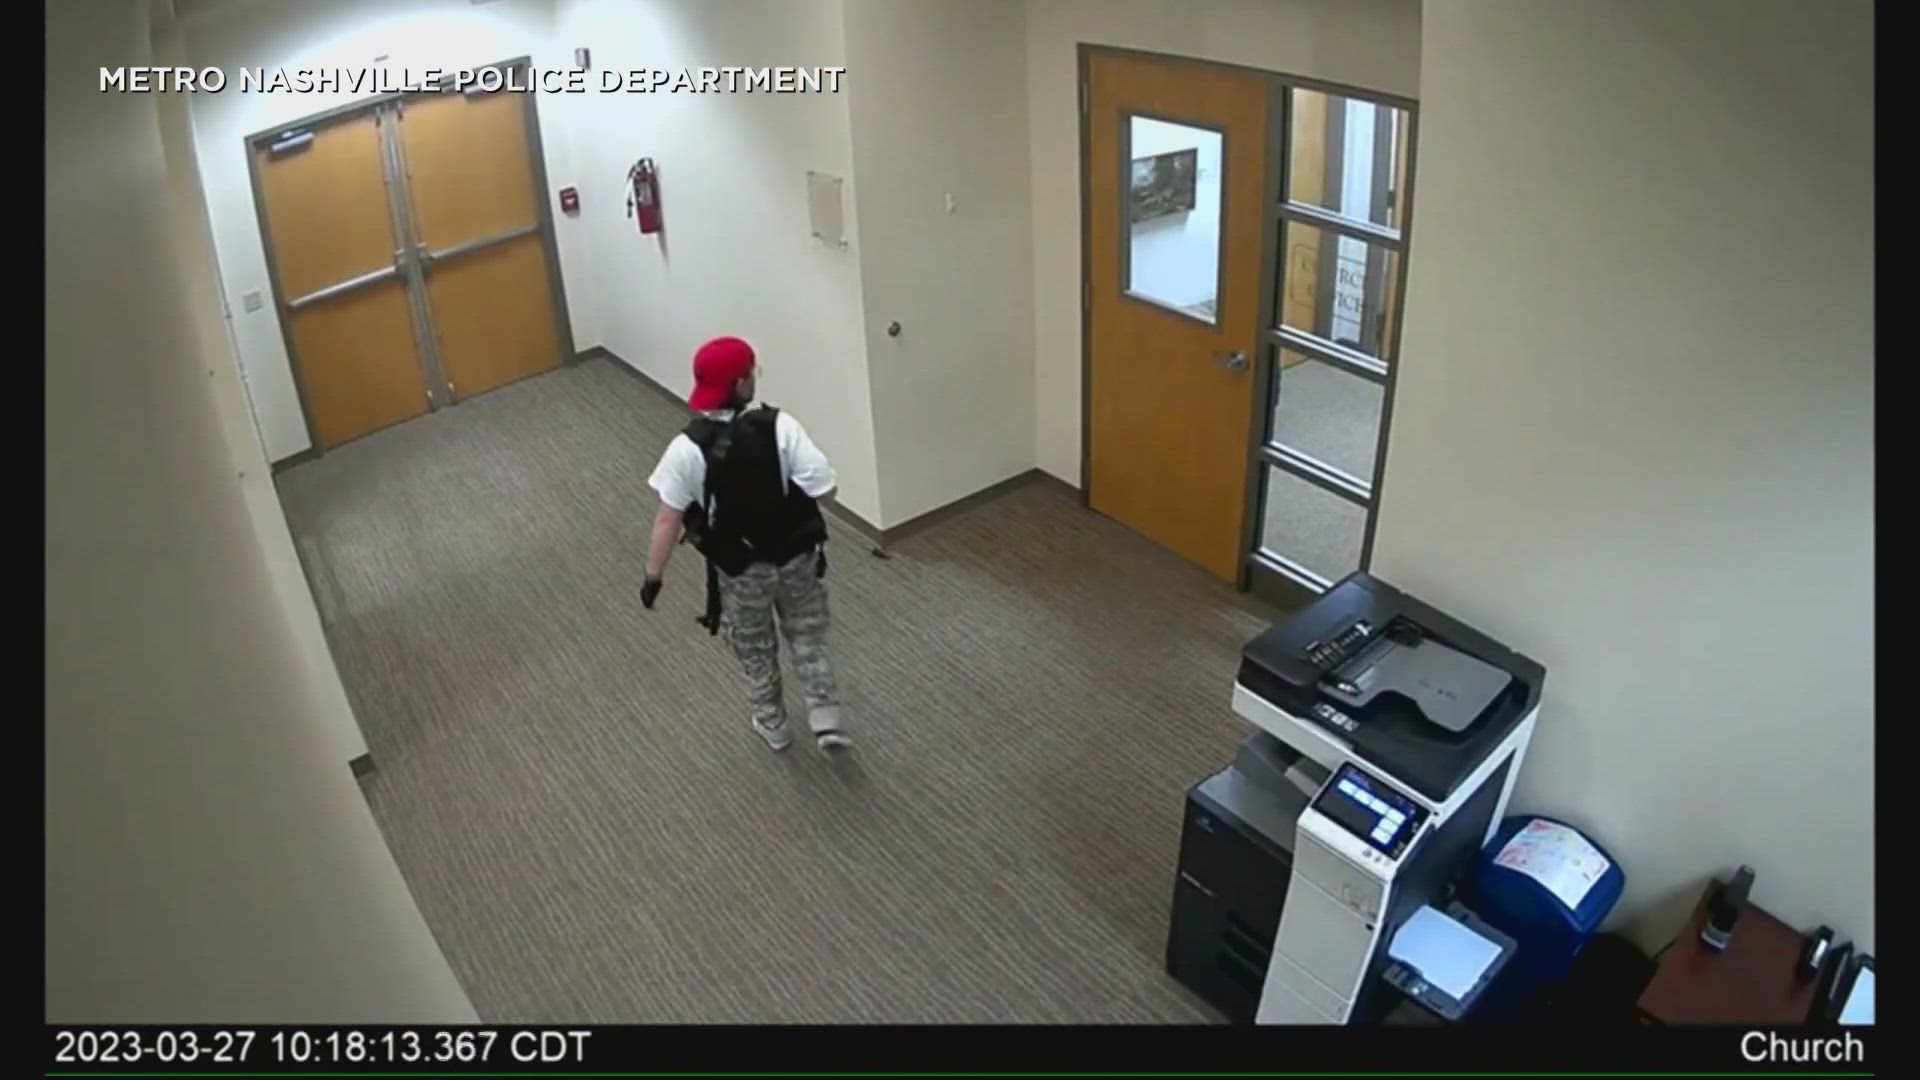 Police released about two minutes of edited surveillance video that included a view of glass doors to the school being shot out and the shooter ducking through.